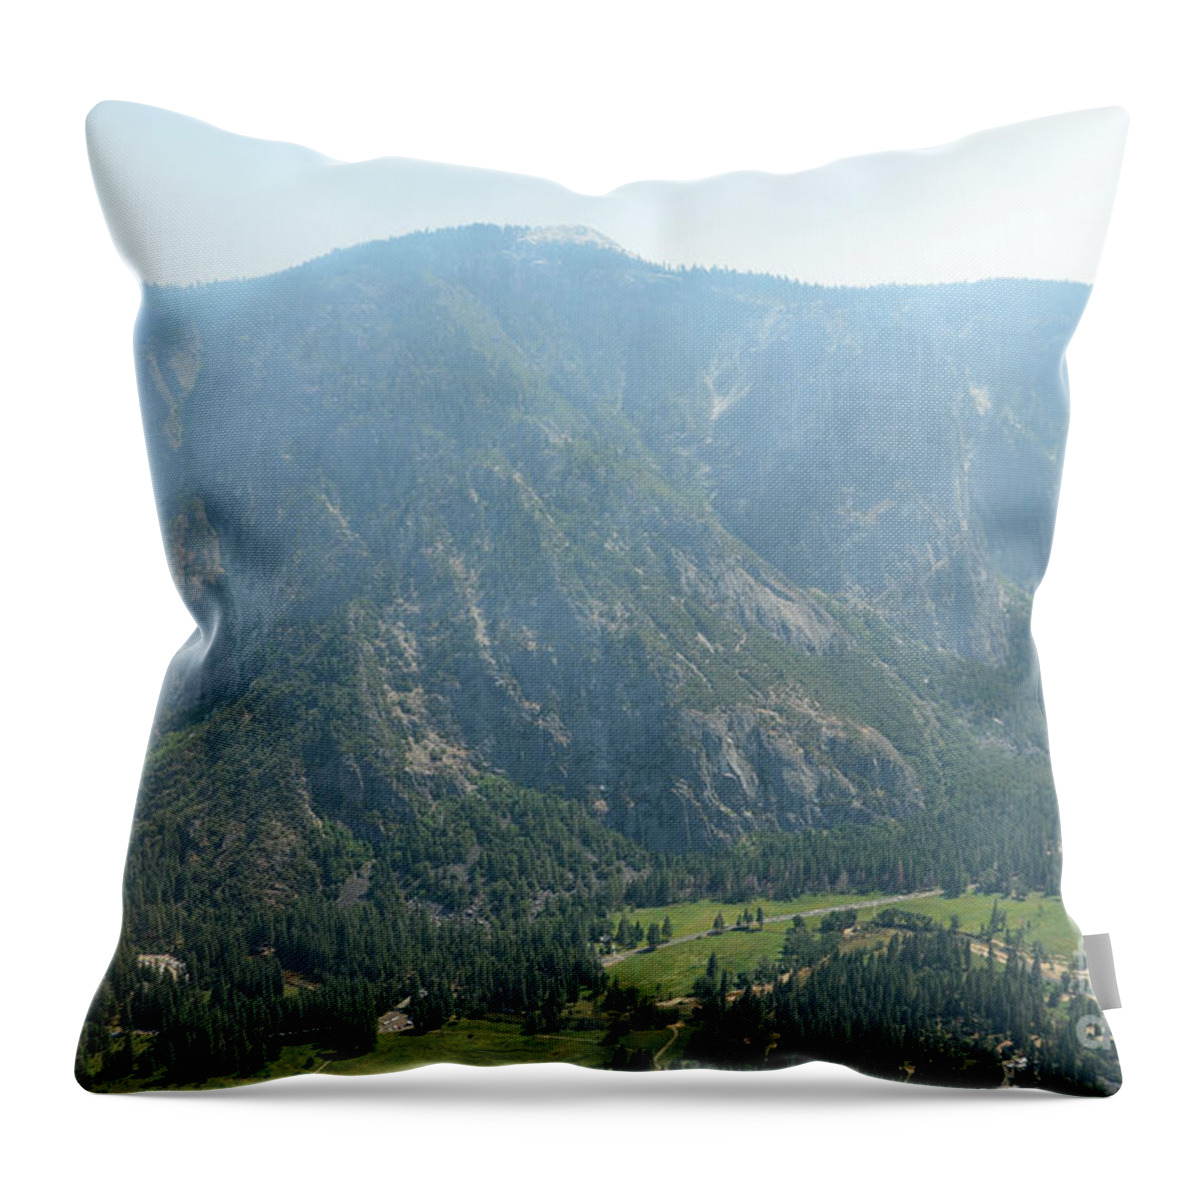 Yosemite National Park Throw Pillow featuring the photograph Yosemite Valley by Cassie Marie Photography